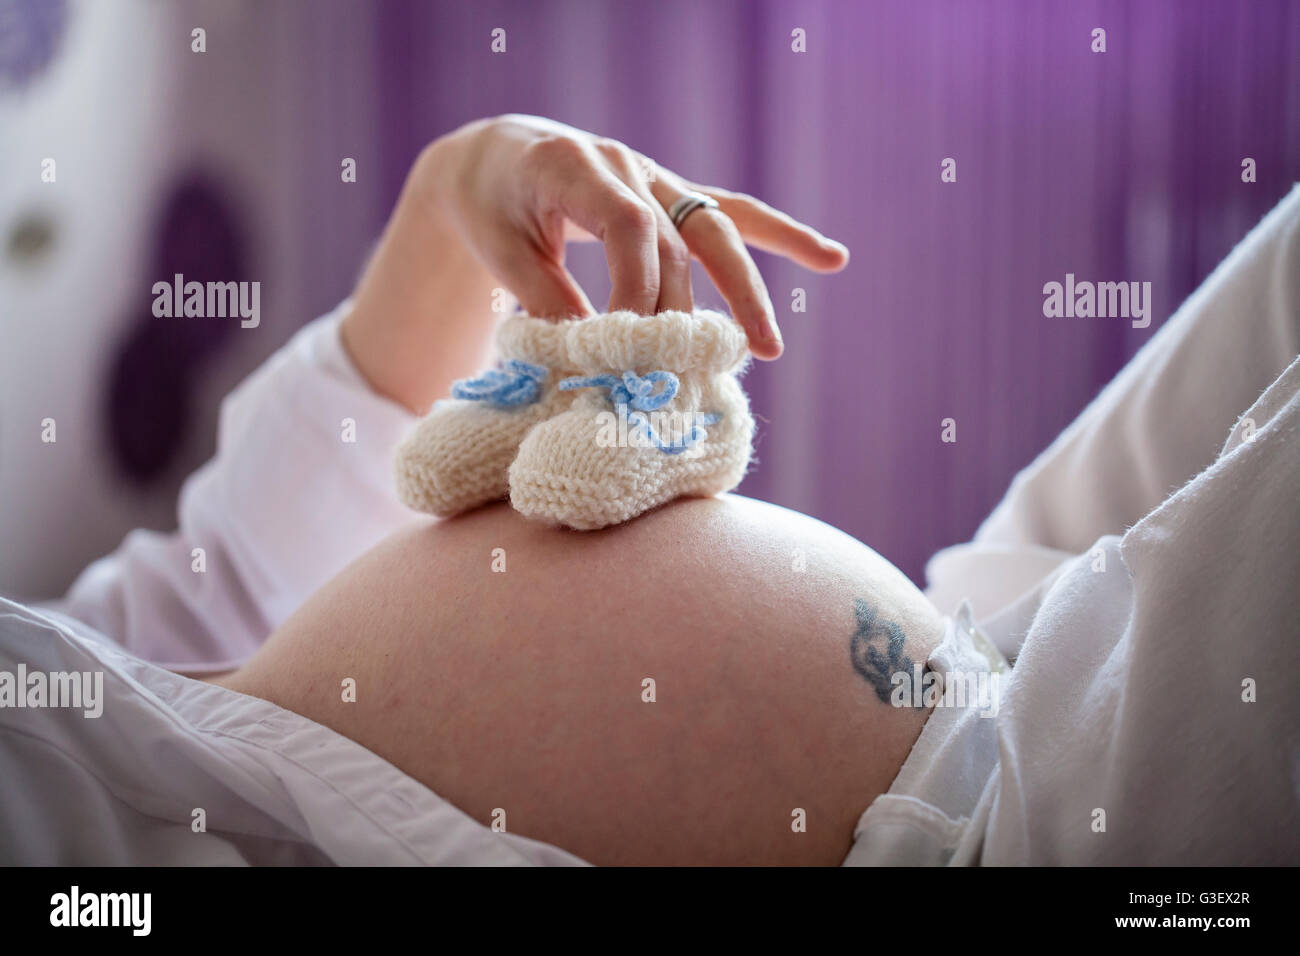 Pregnant woman holding baby shoes on her belly Stock Photo